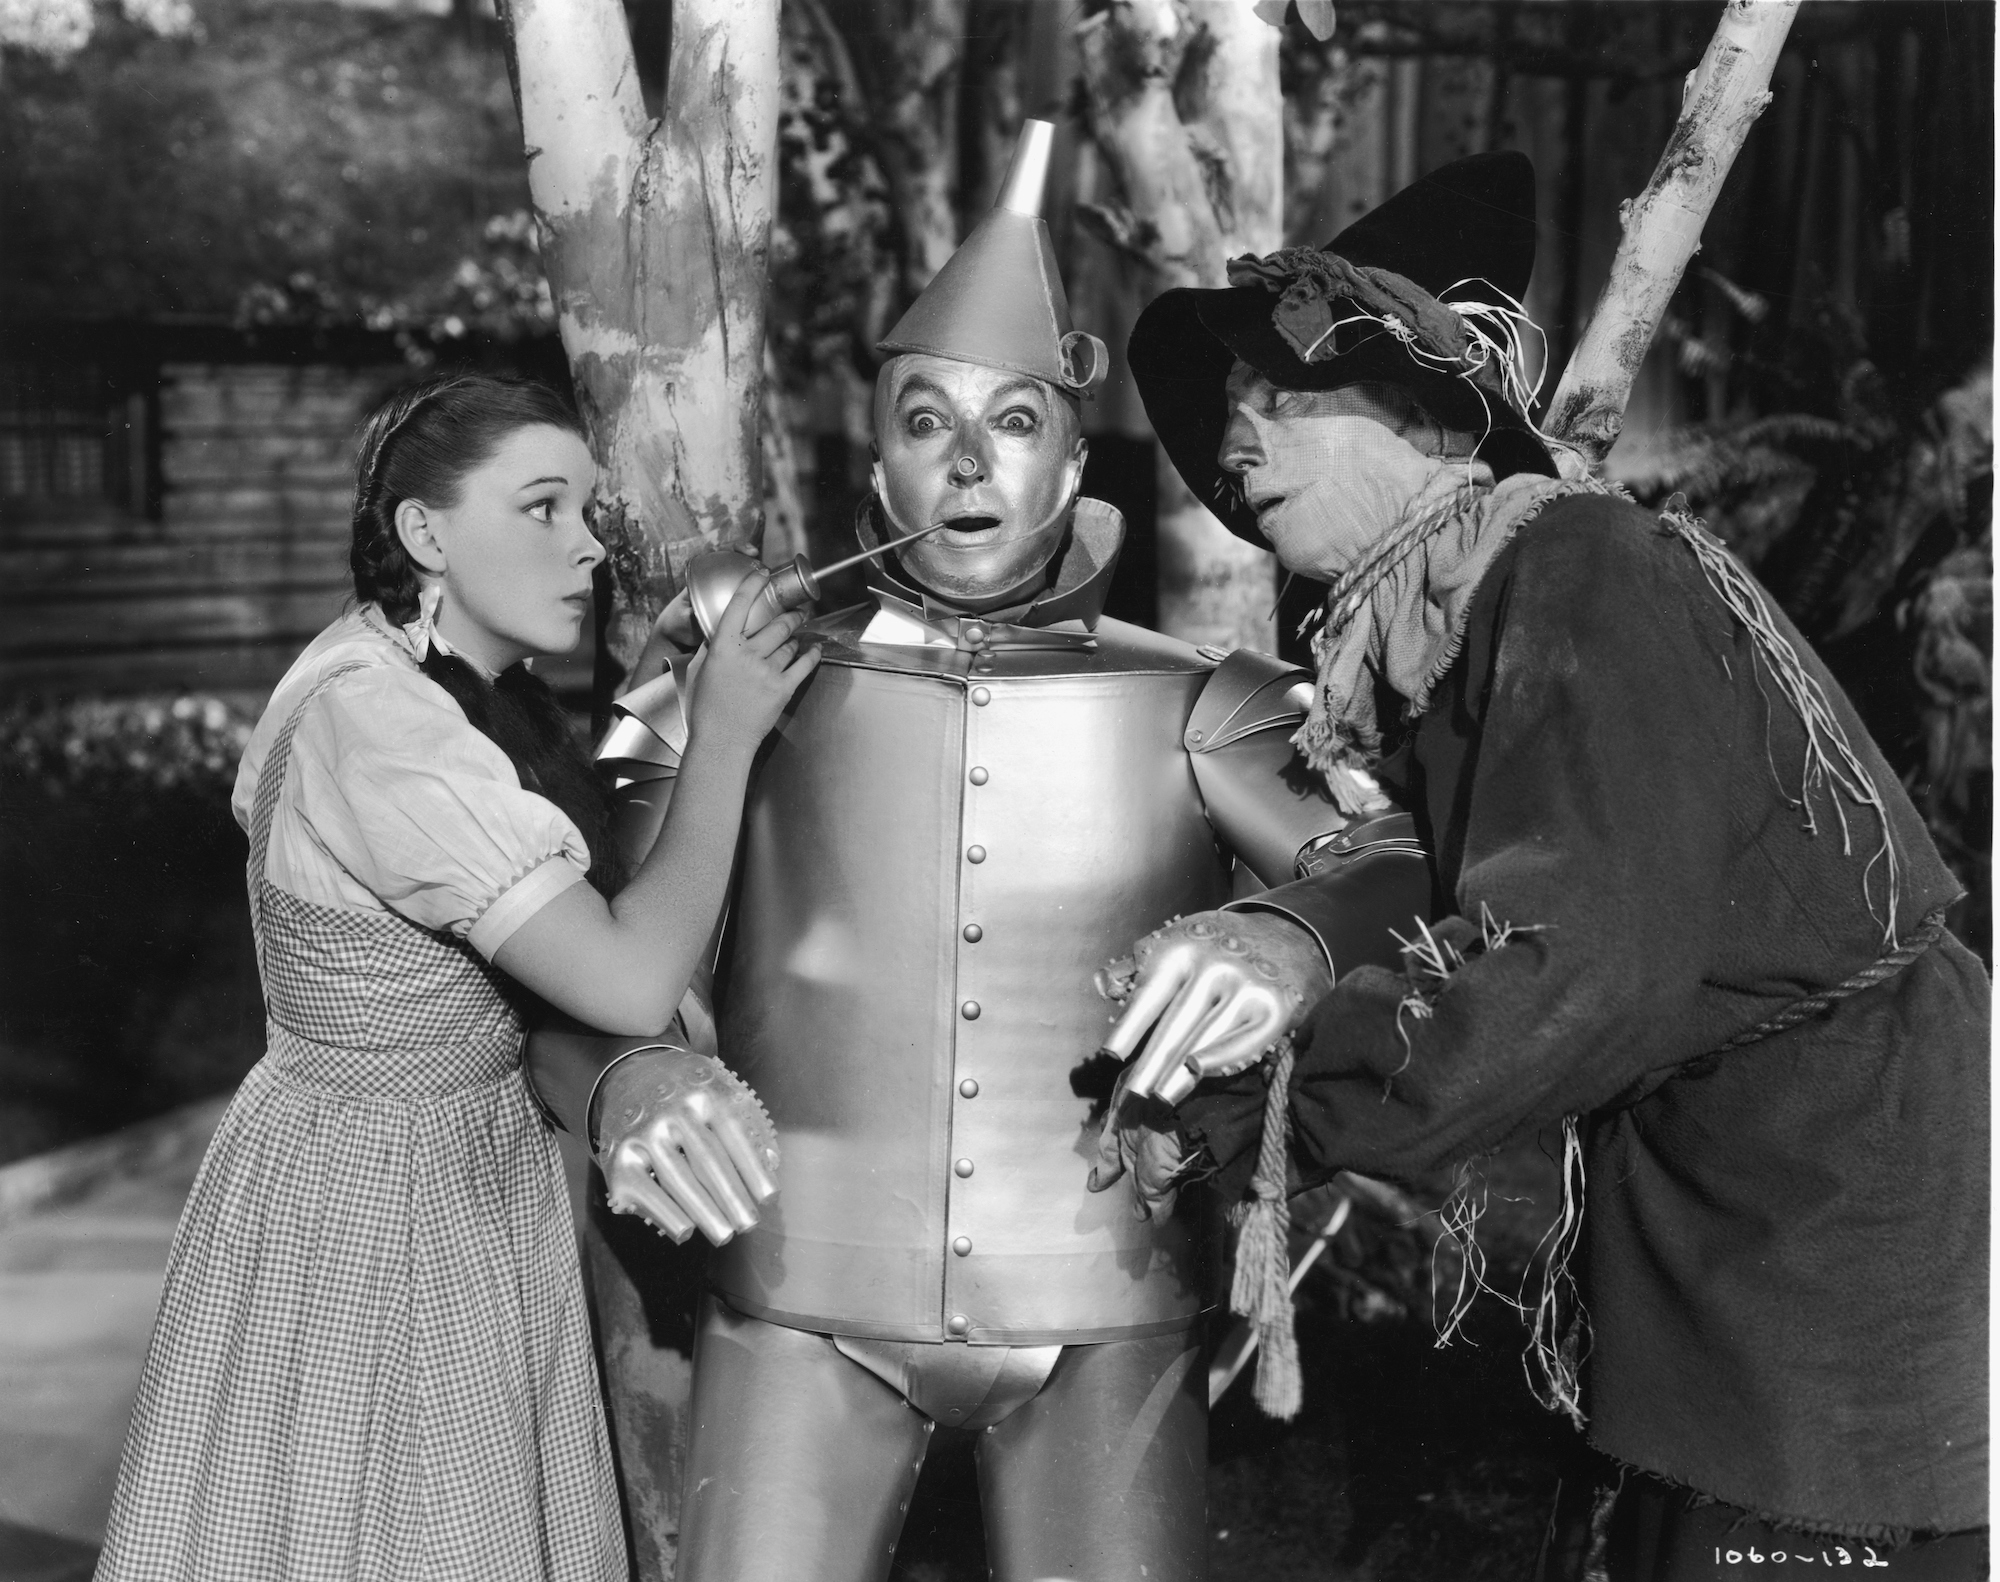 (L-R) Judy Garland as Dorothy, Jack Haley as the Tin Man, and Ray Bolger as Scarecrow